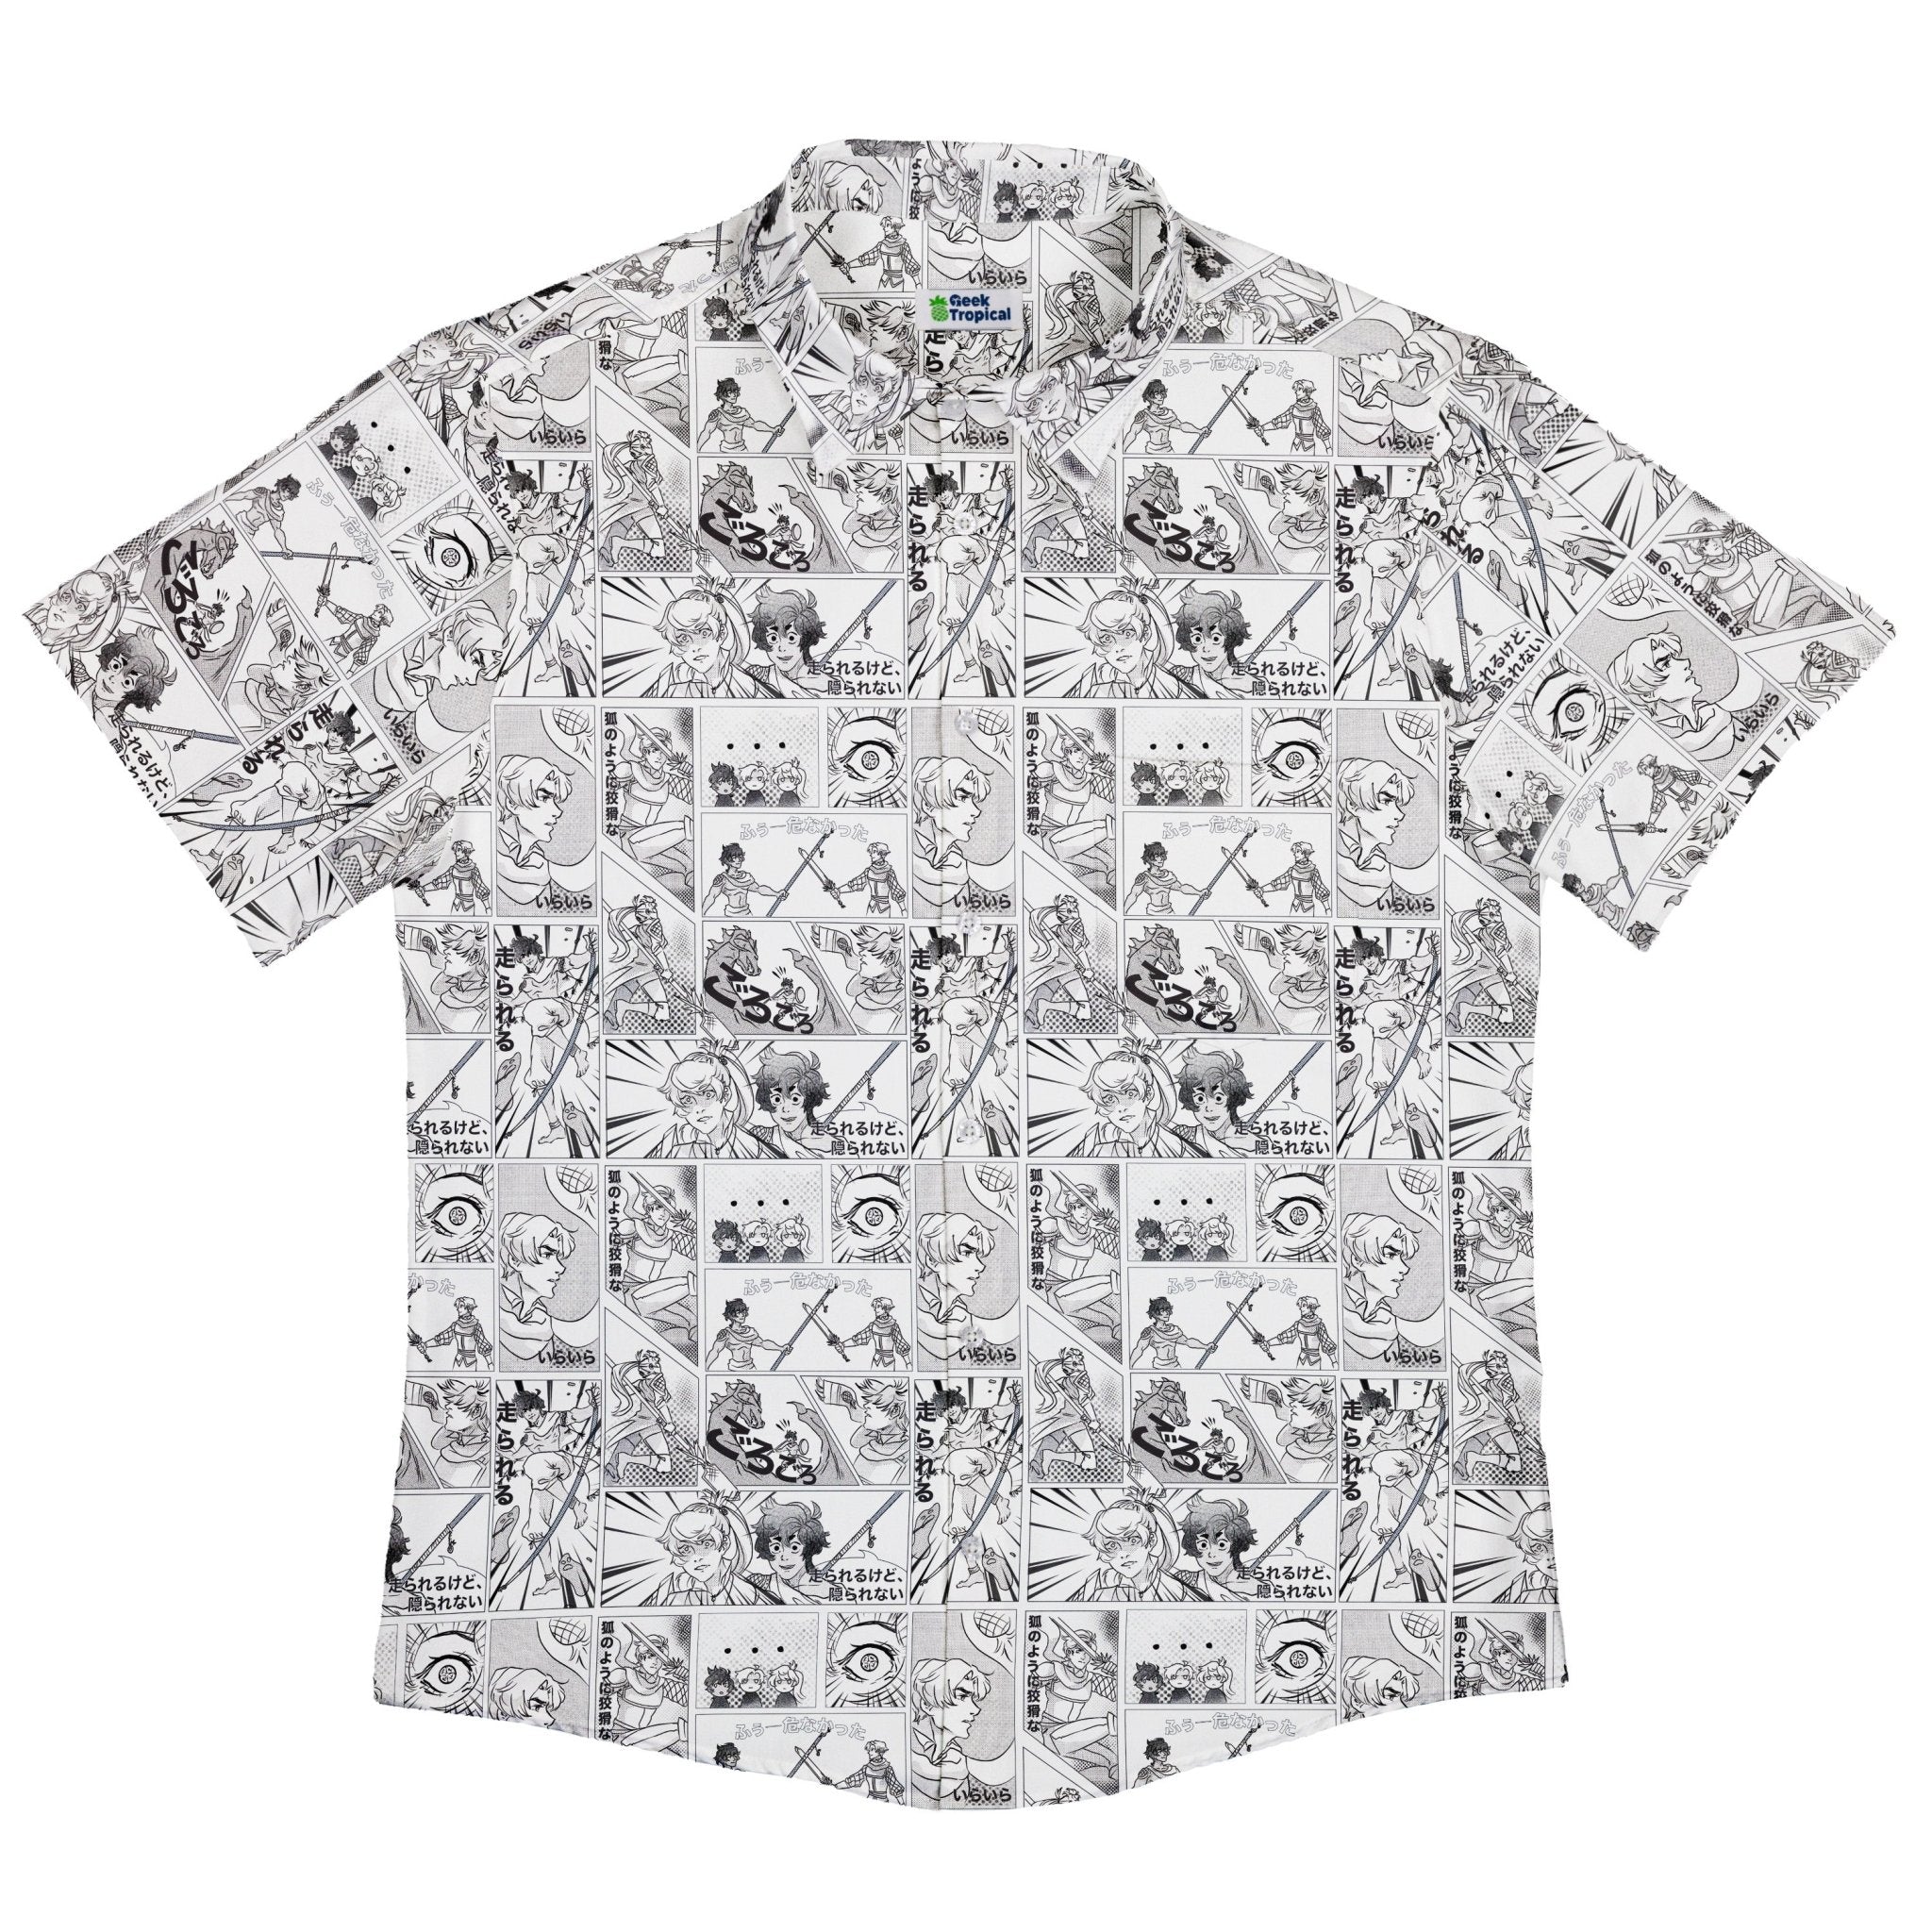 Geek Tropical Manga Button Up Shirt - adult sizing - Anime - Design by Claire Murphy